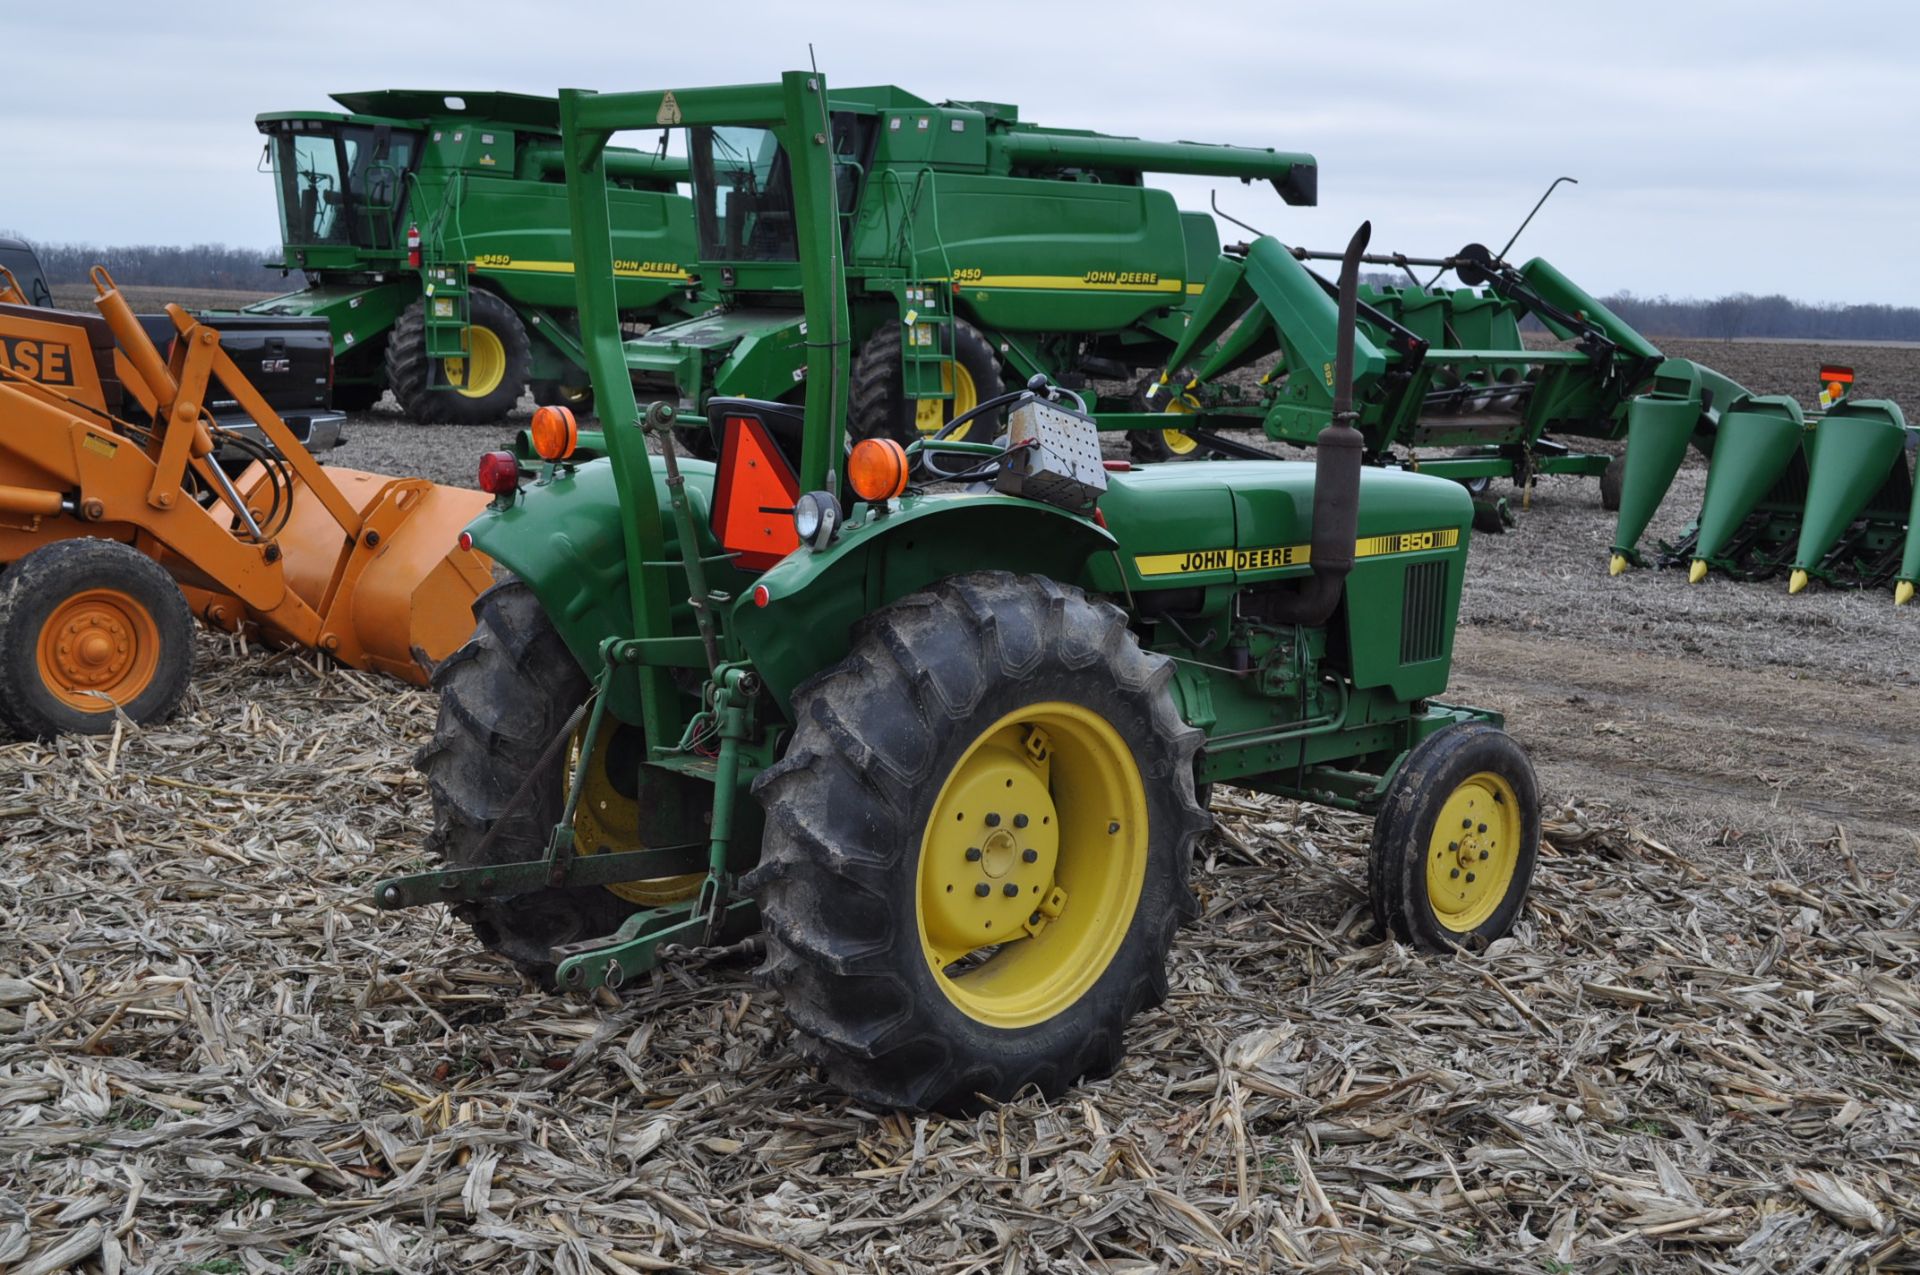 John Deere 850 utility tractor, diesel, 12.4-24 rear, 5.00-16 front, 2 hyd remotes, 3 pt, 540 pto, - Image 3 of 13